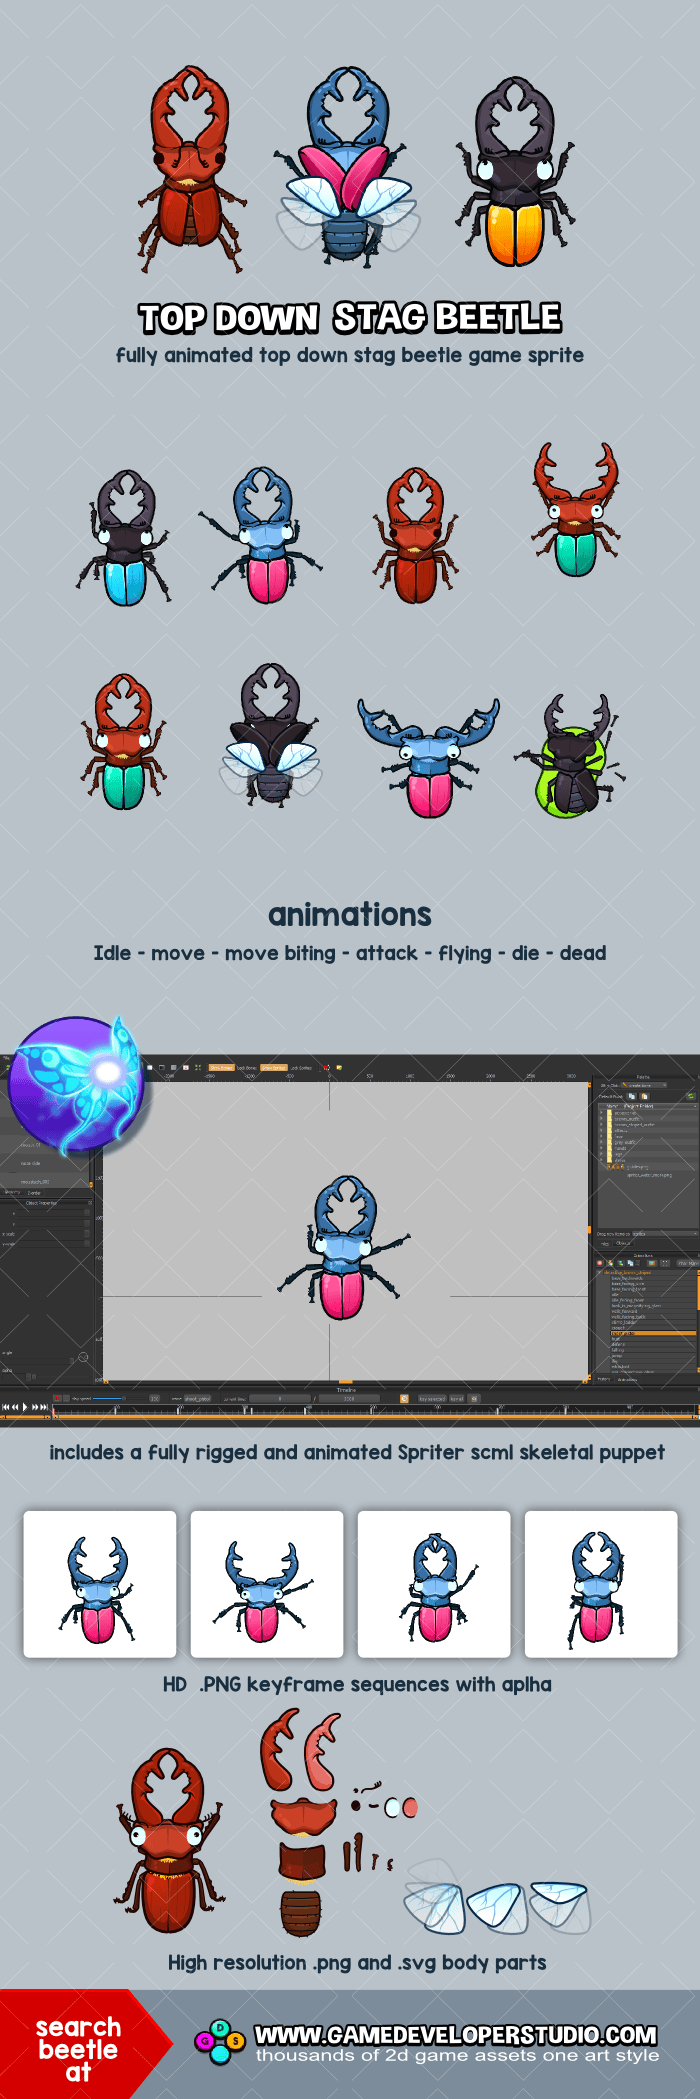 Animated stag beetle game sprites